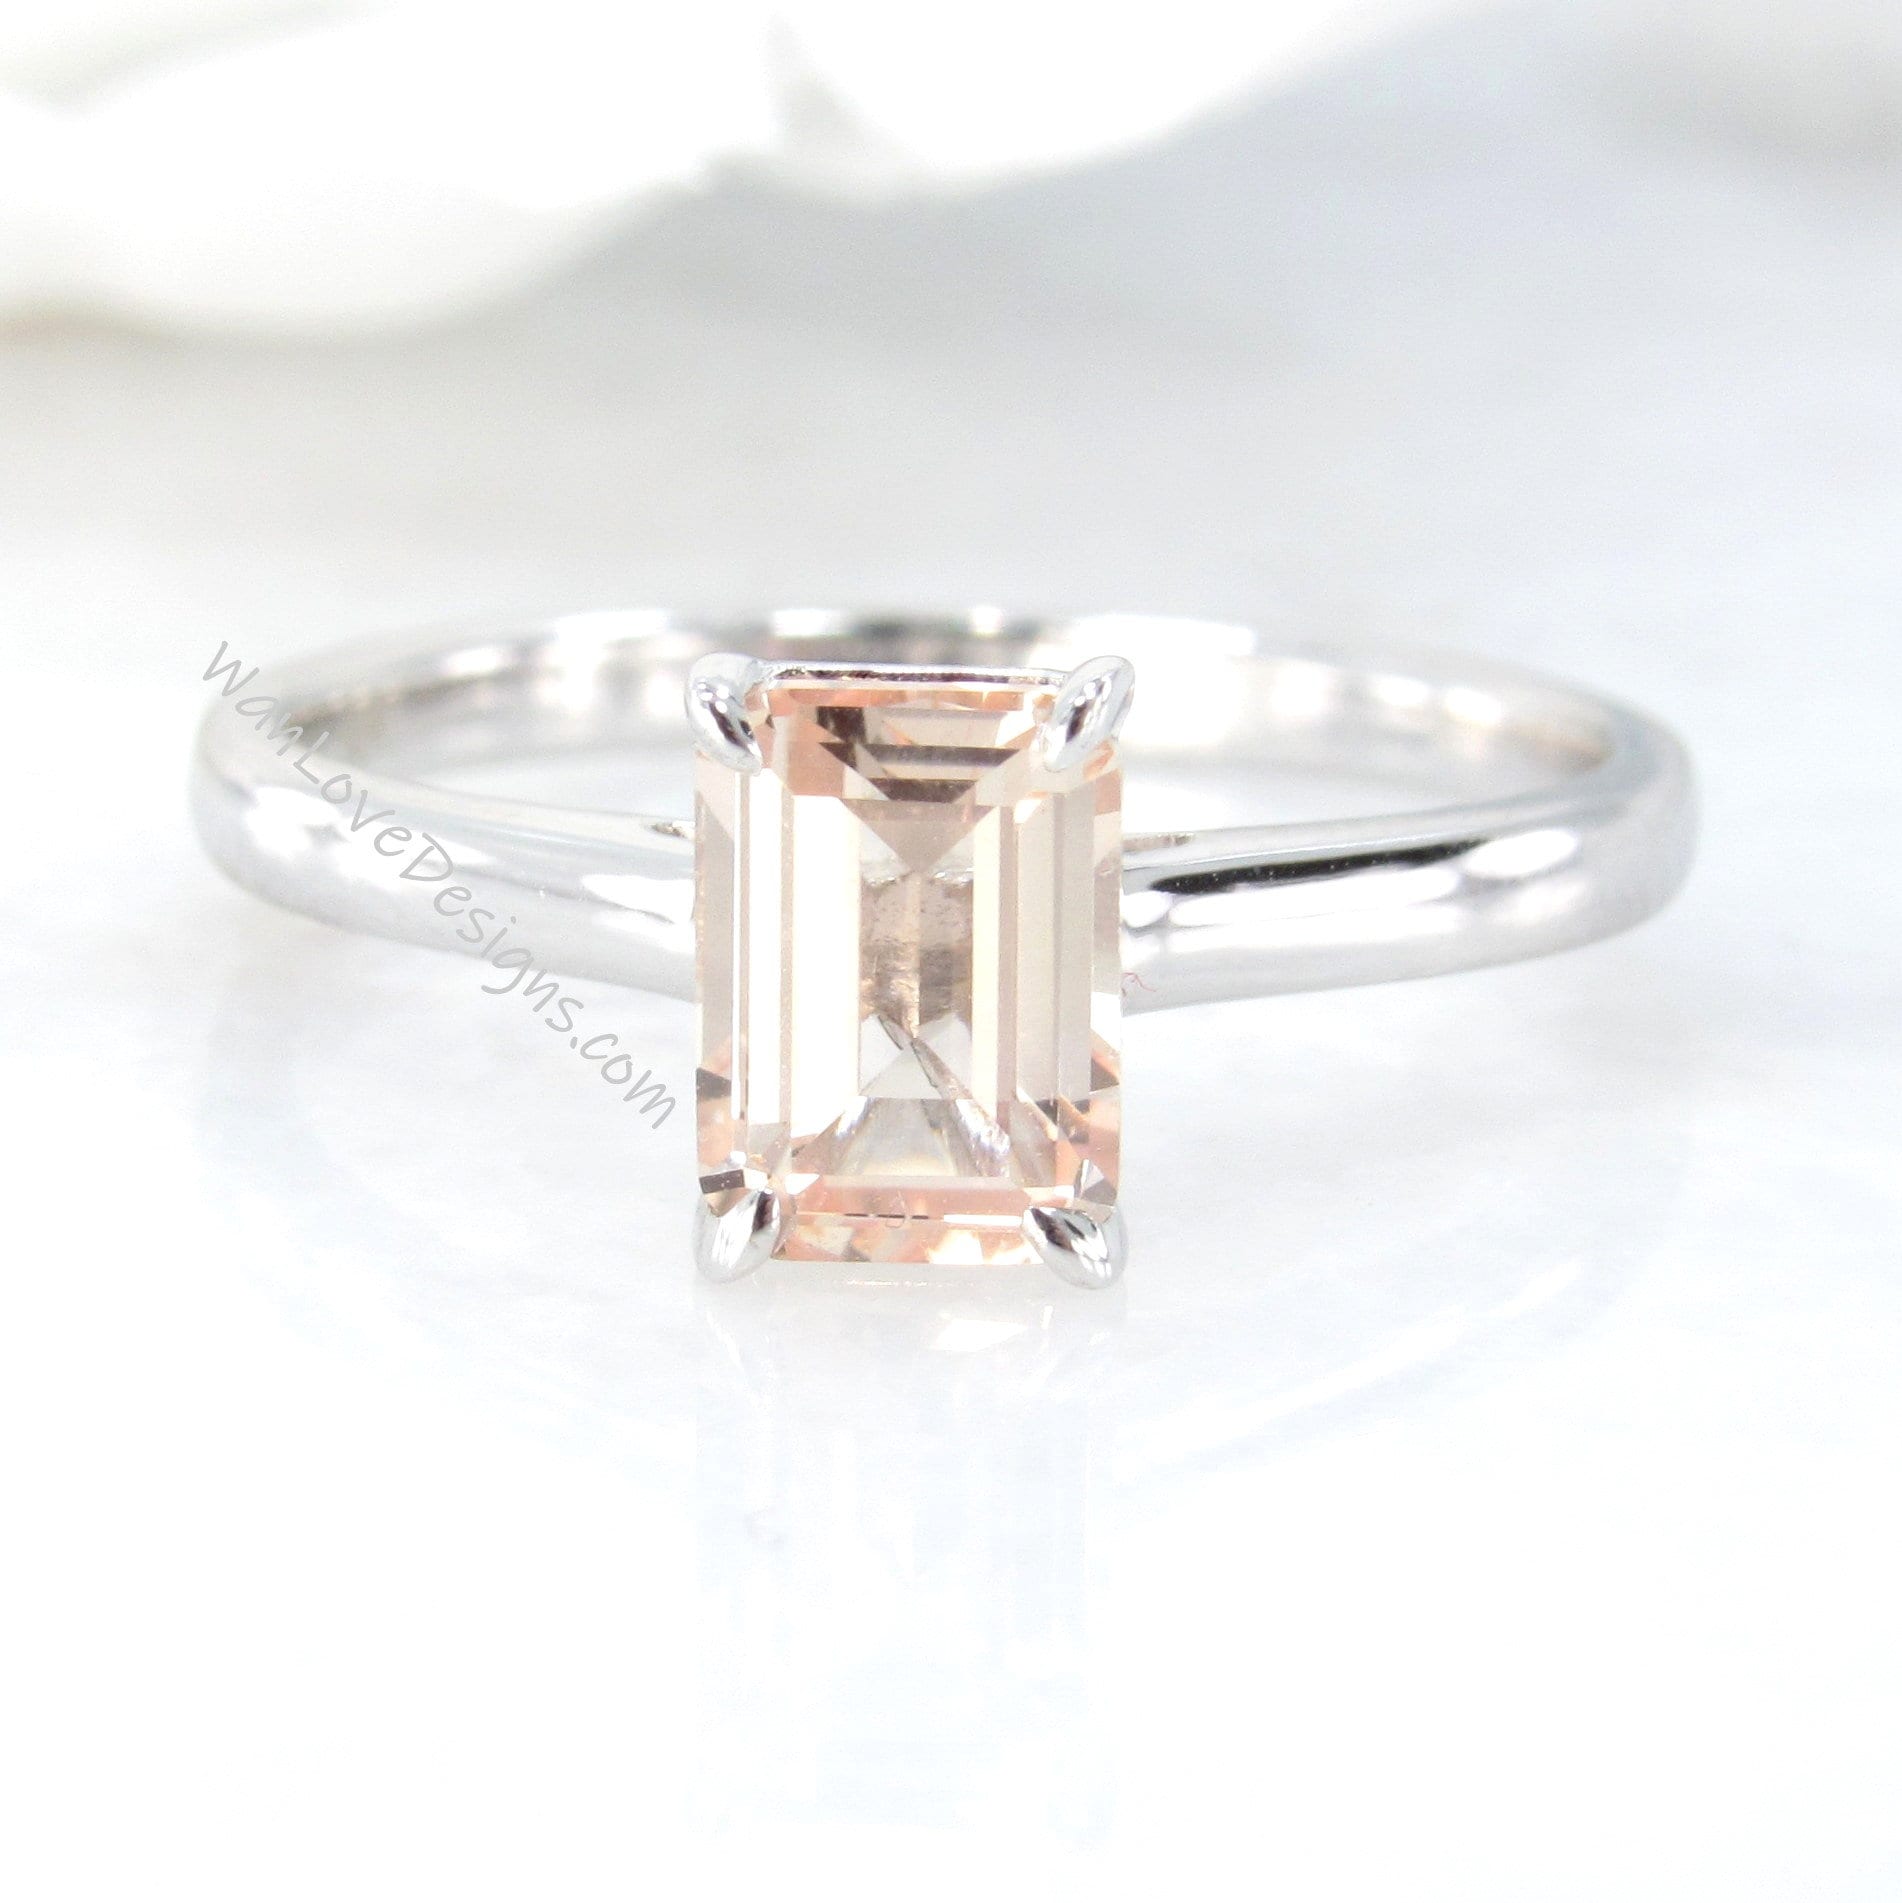 Peach Champagne Sapphire Emerald cut Solitaire Engagement Ring 1ct 7x5mm White Gold Wedding promise ring Anniversary Gift, Ready to Ship Wan Love Designs